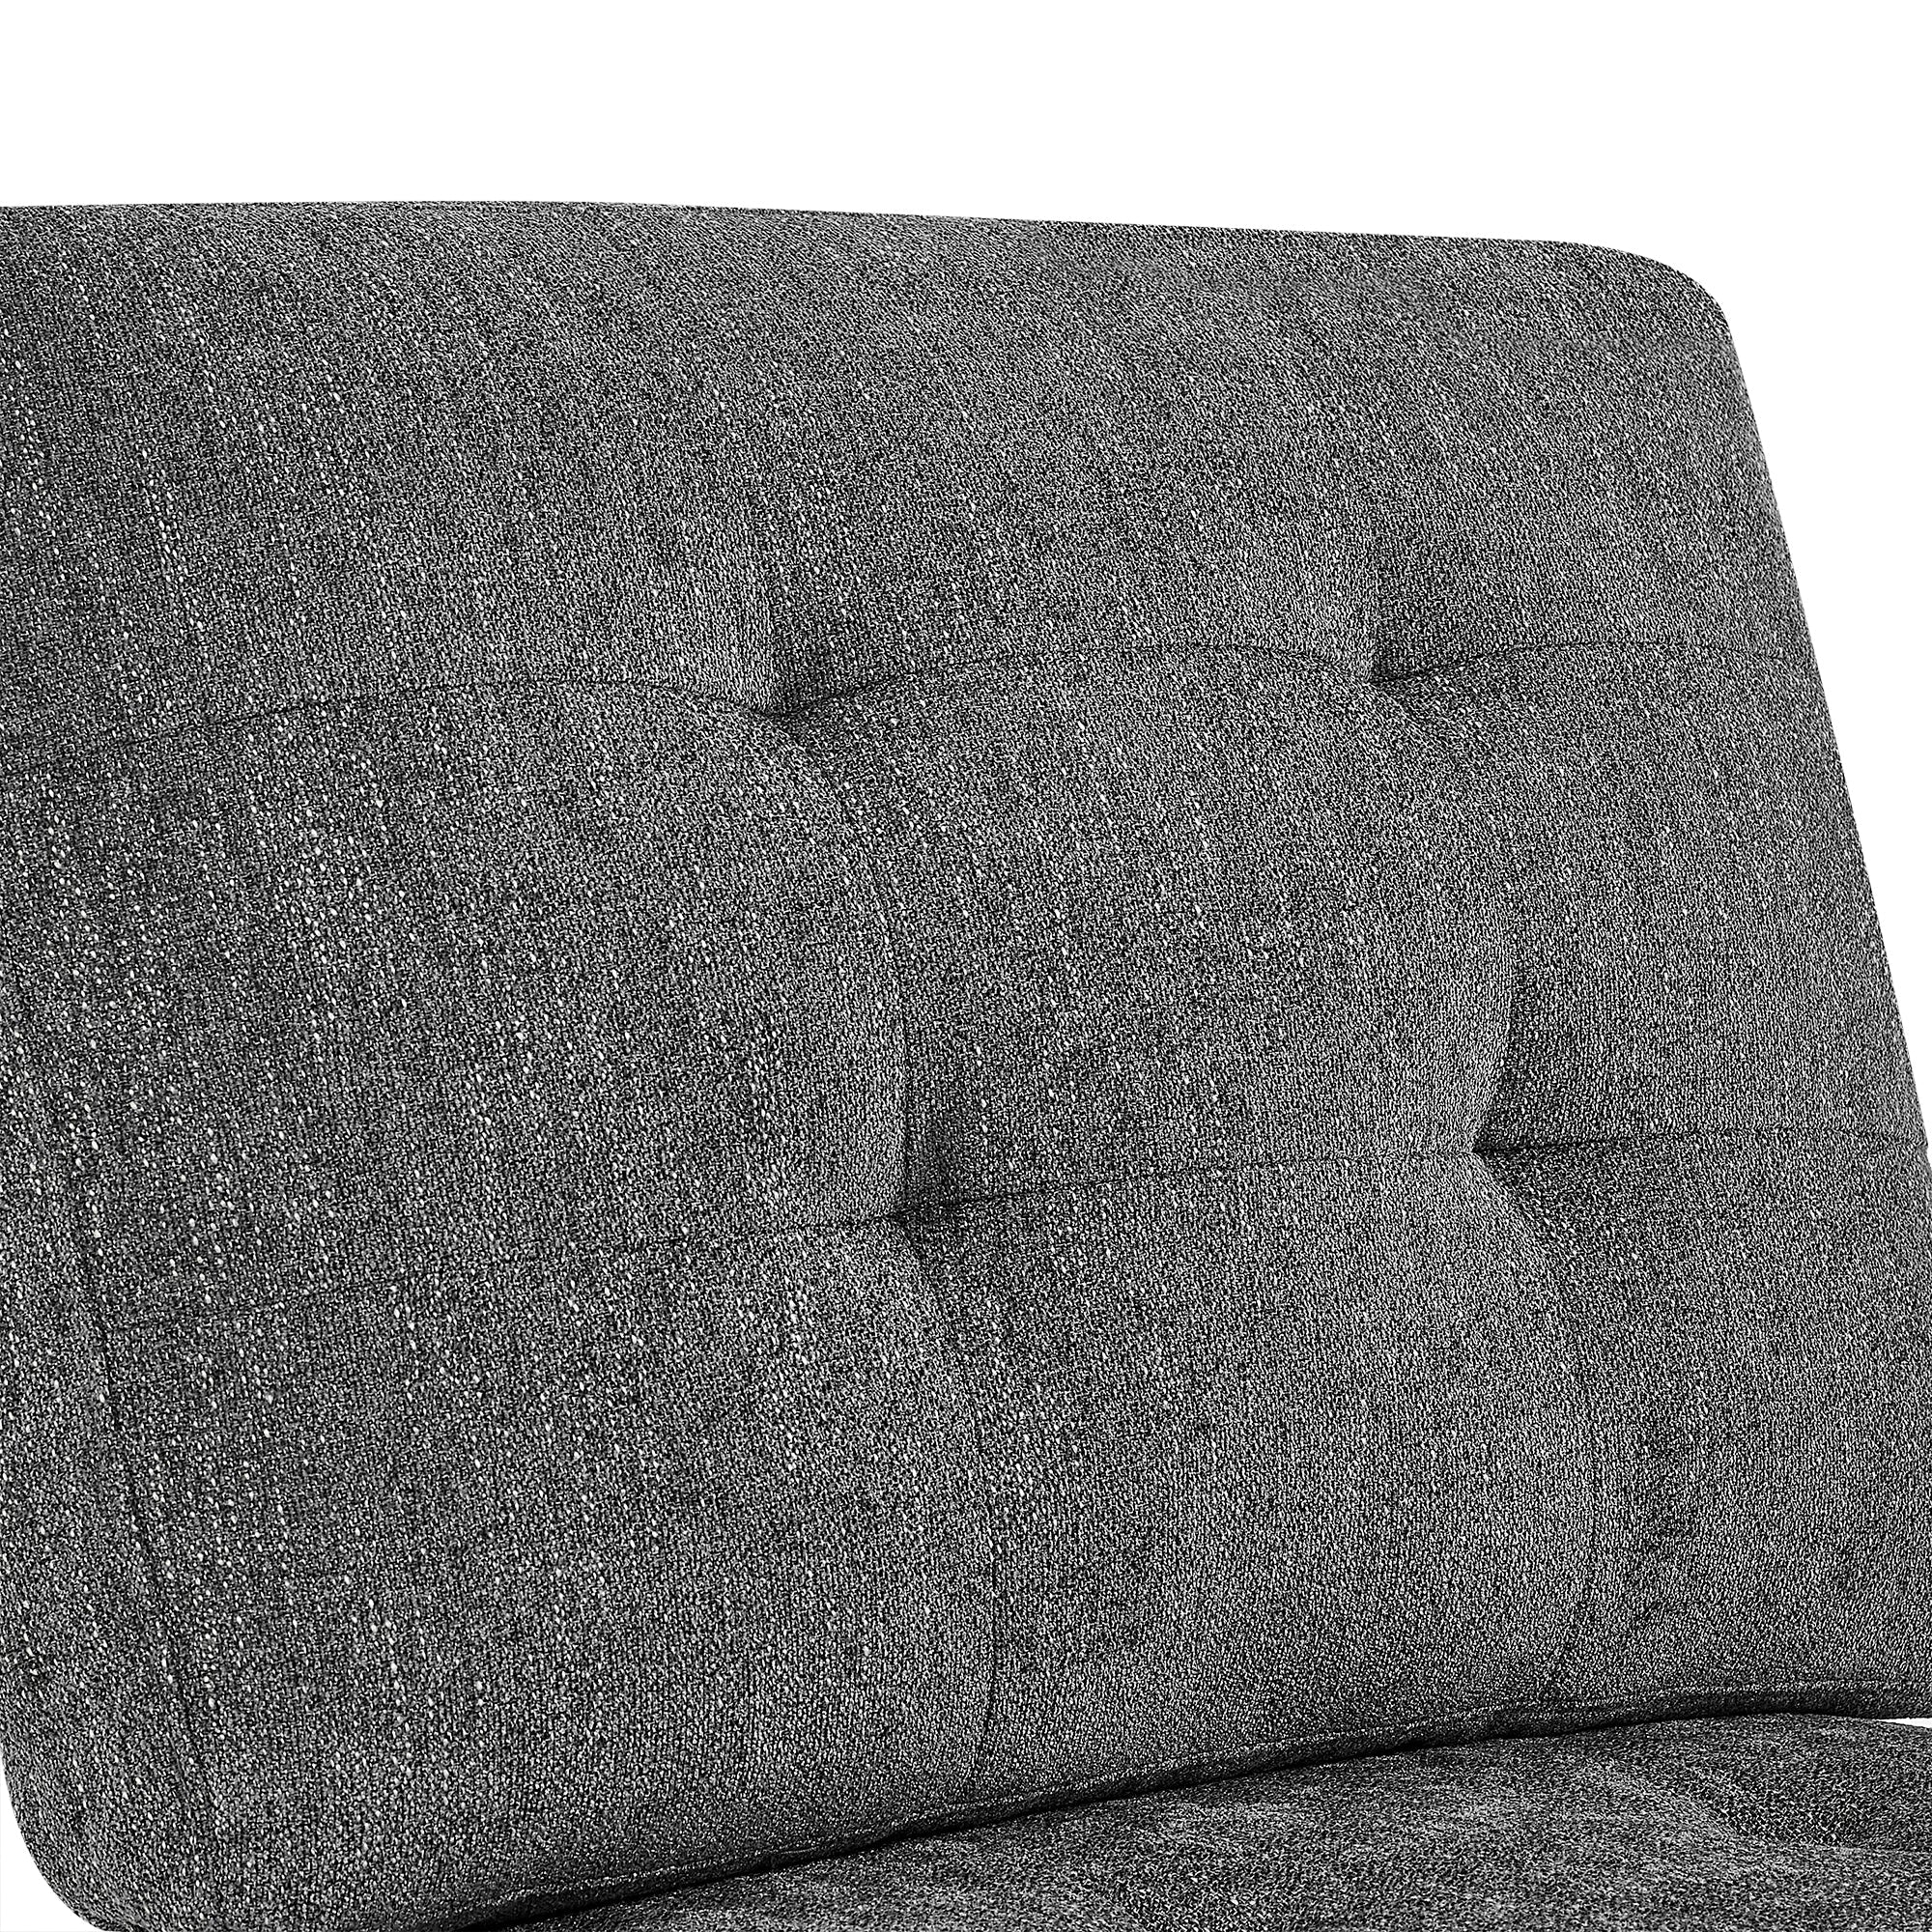 L-Shaped Modular Sectional Sofa with 3 Single Chairs & 3 Corners - DIY Combination, Grey Chenille Fabric-Stationary Sectionals-American Furniture Outlet